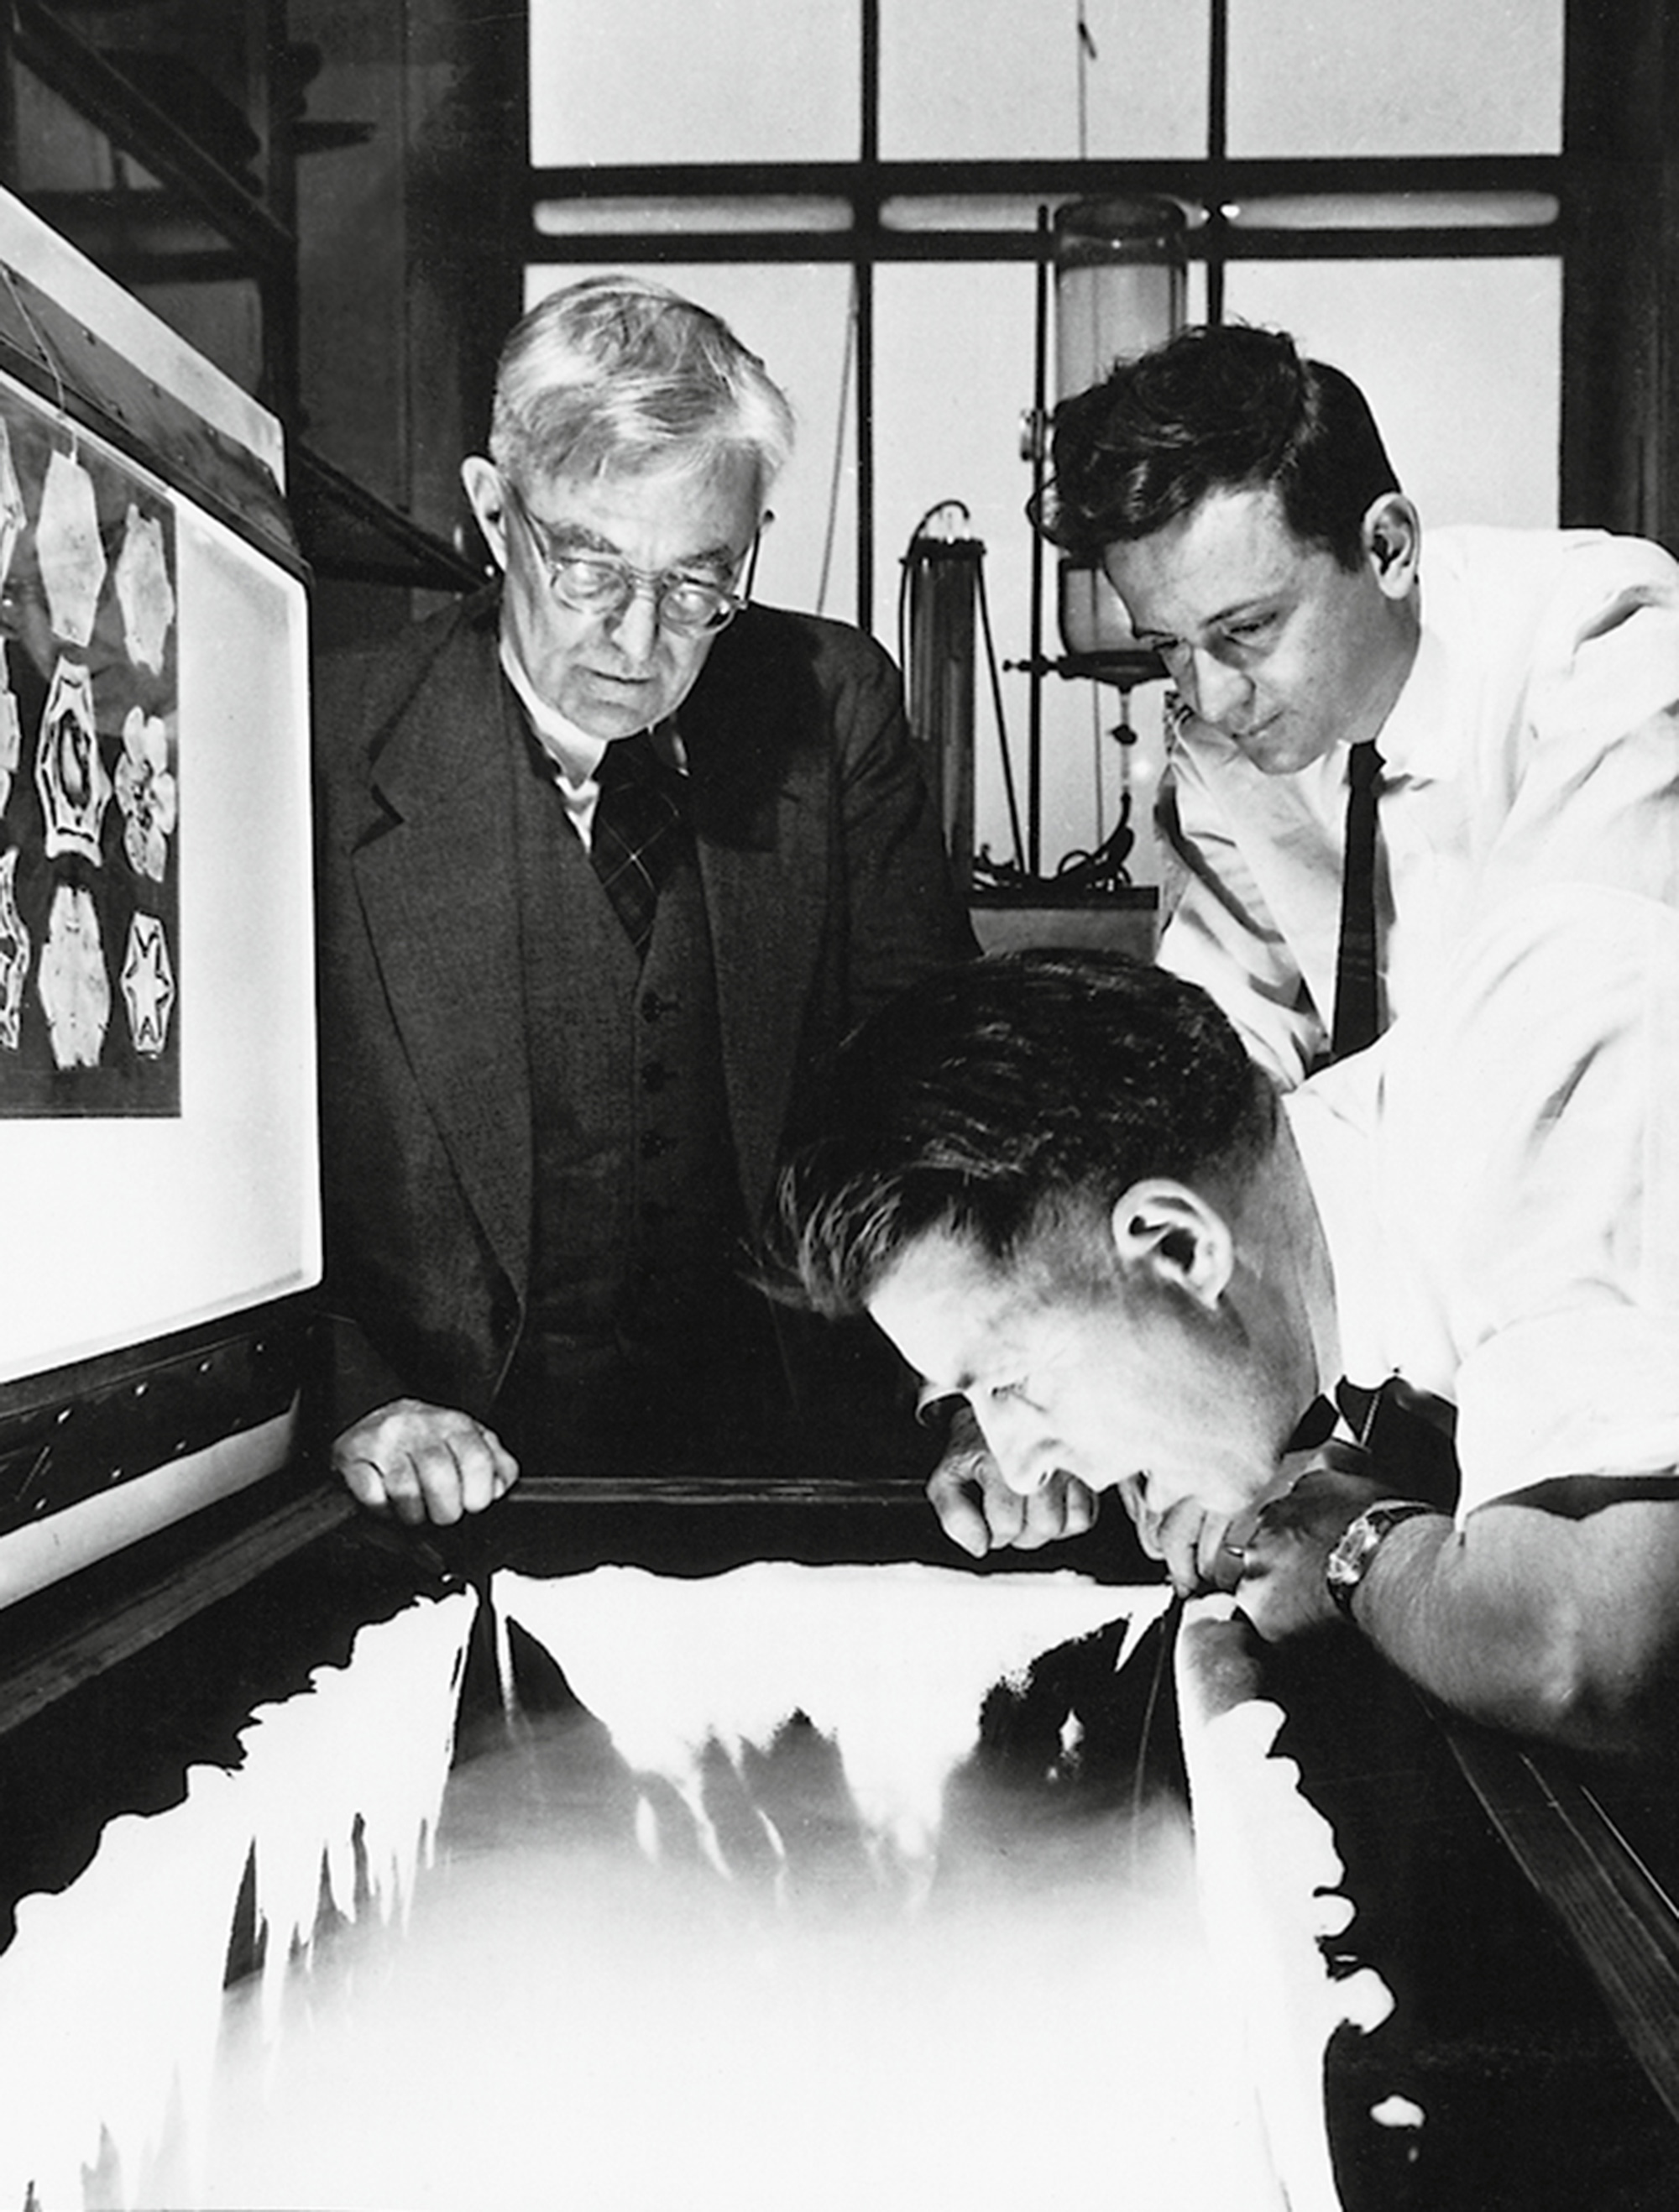 A nineteen forty-seven photograph of the rainmakers Irving Langmuir, Vincent Schaefer, and Bernard Vonnegut at work on cloud seeding in a GE laboratory.